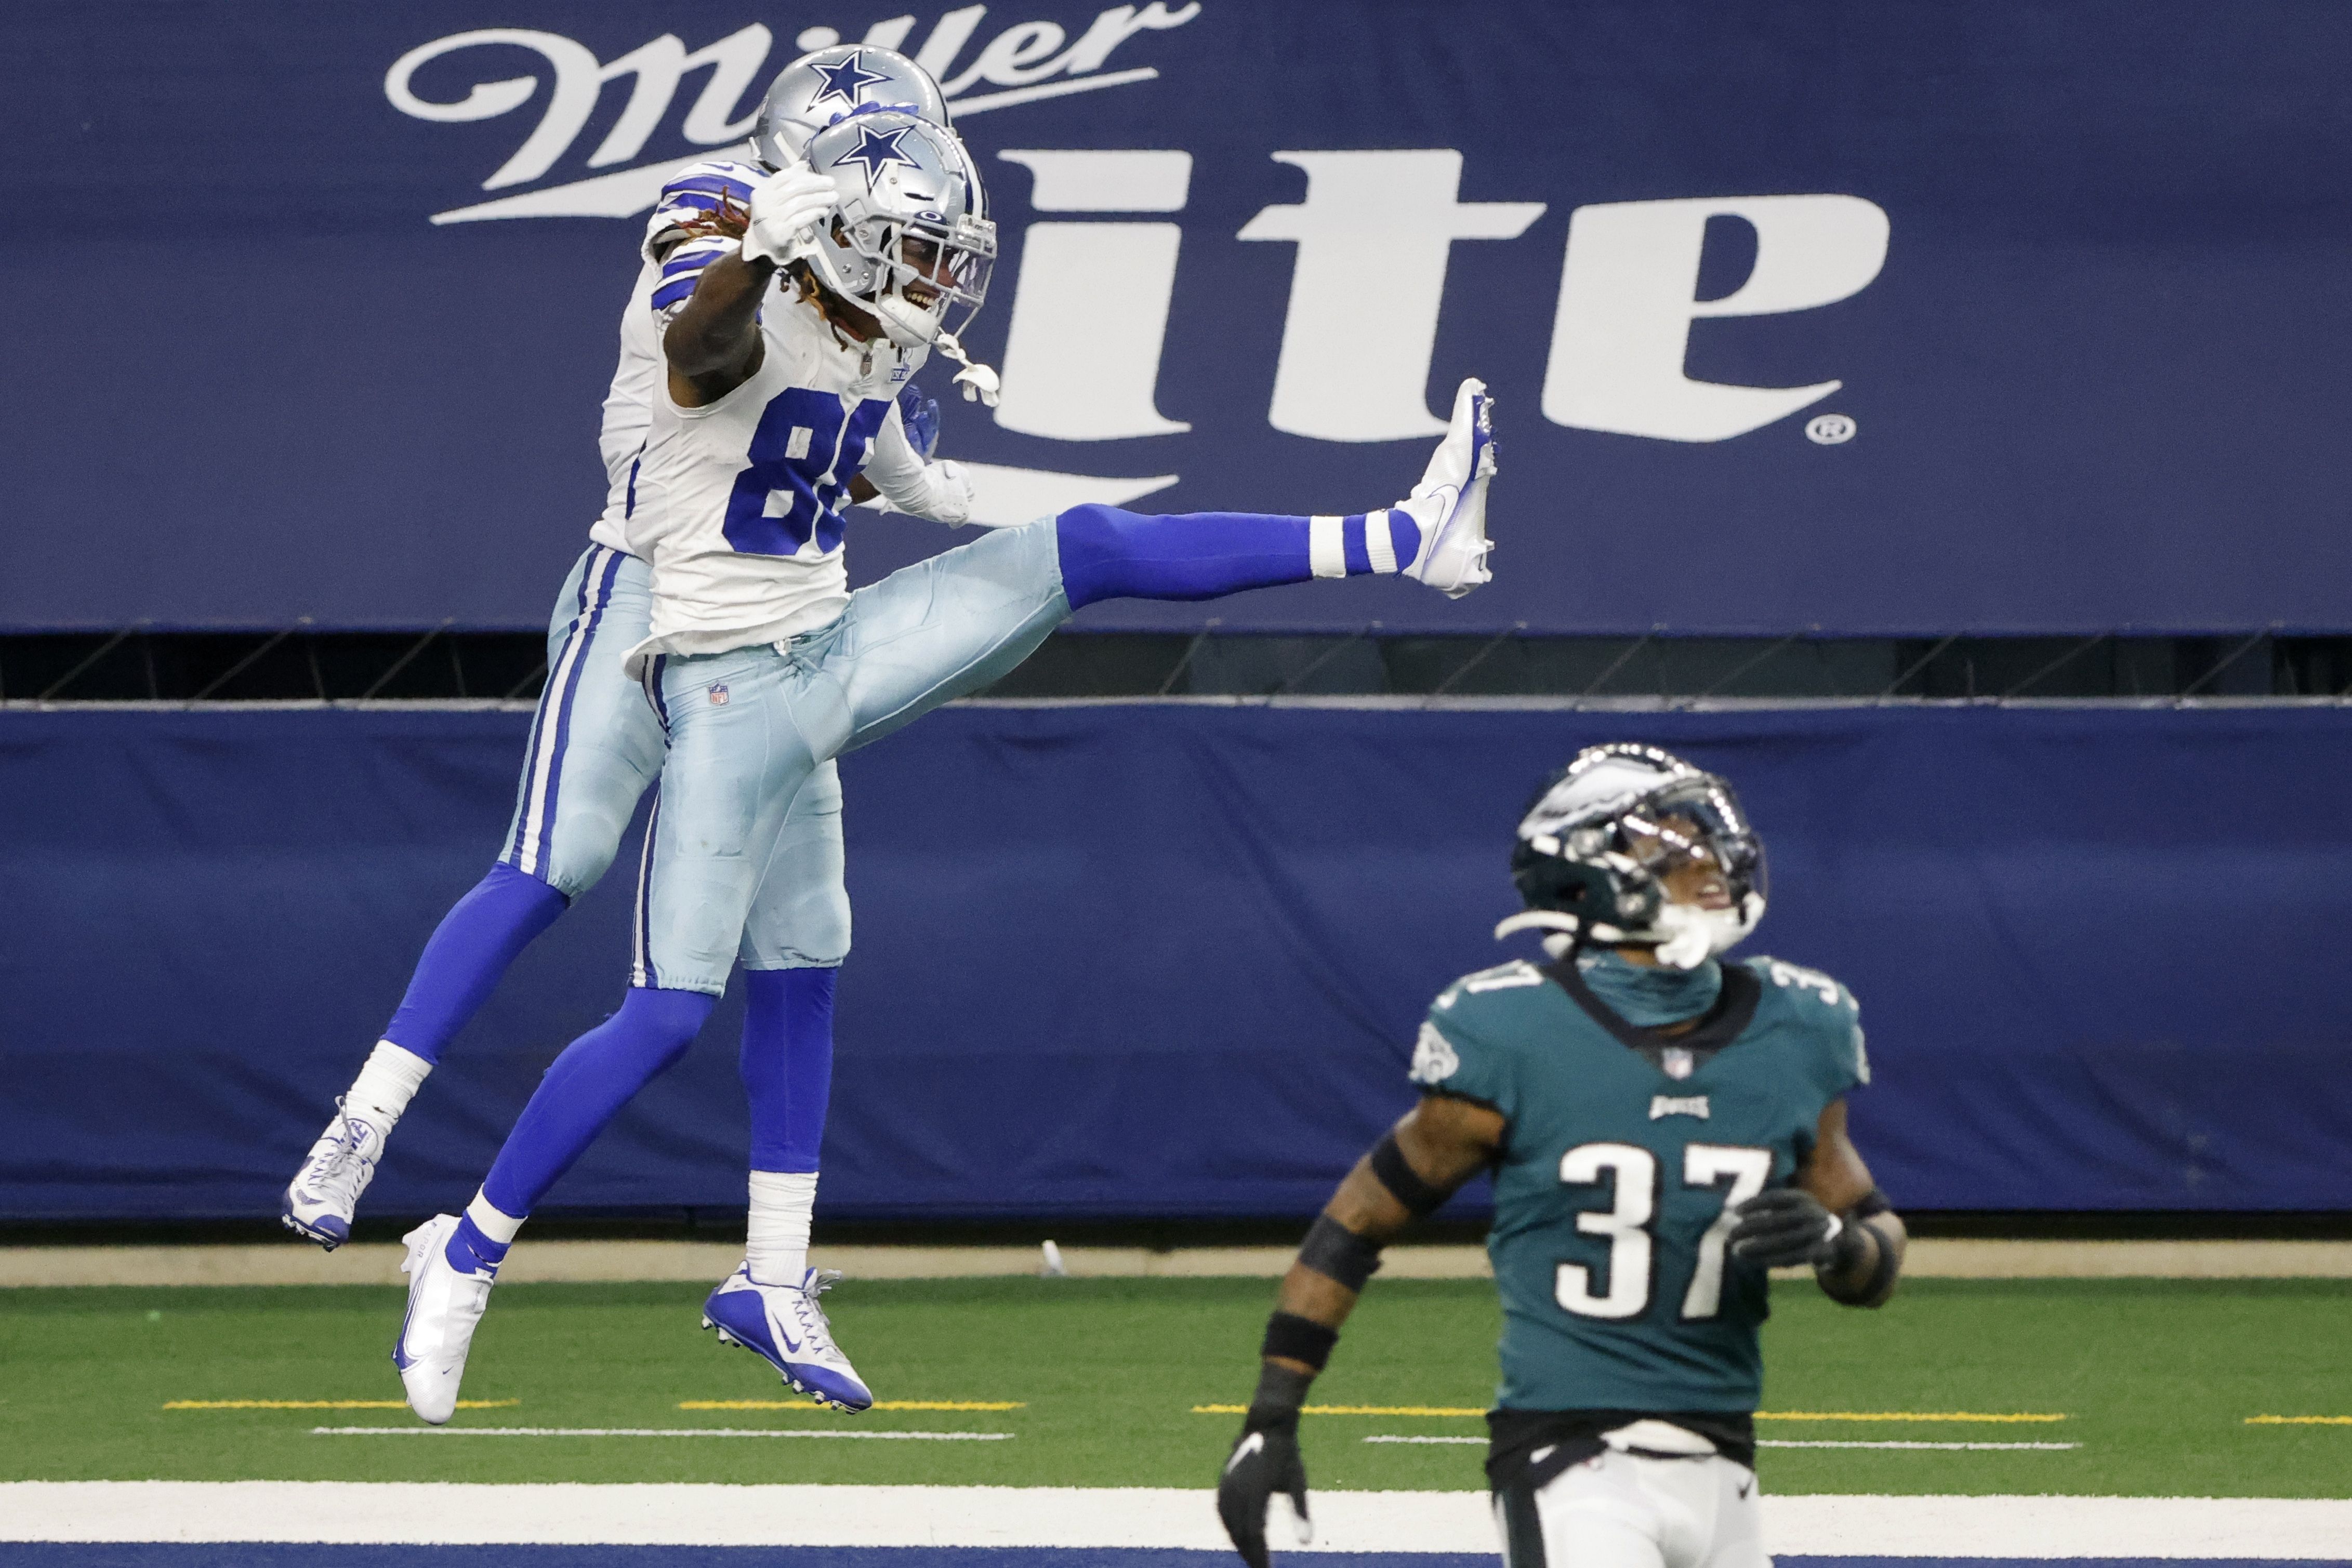 NFL roundup: Eagles clinch playoff place as Cowboys avoid upset to Texans, NFL